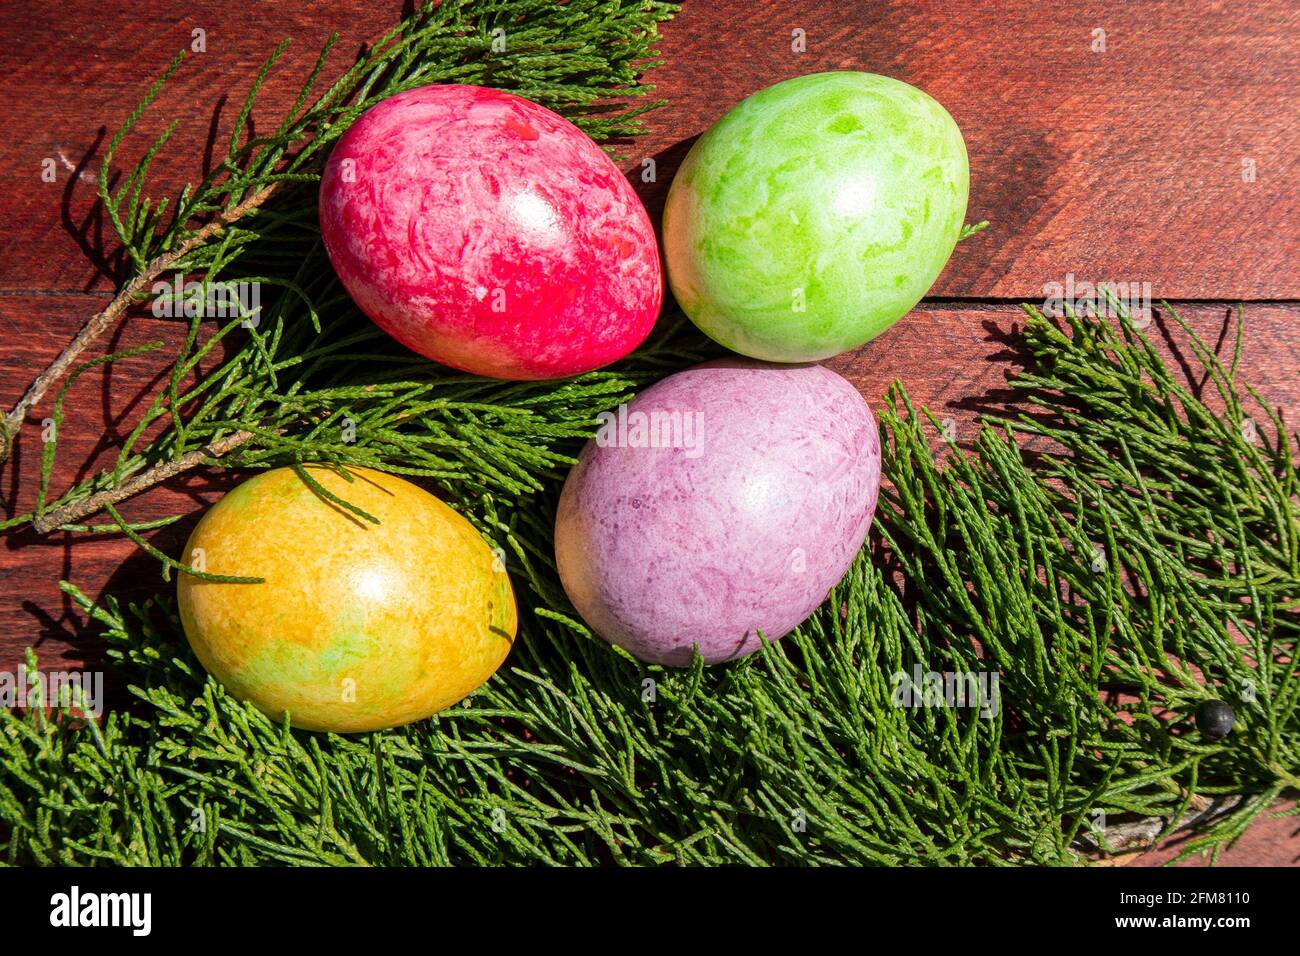 Four multicolored bright easter eggs and thuja branch lying on red wood surface Stock Photo